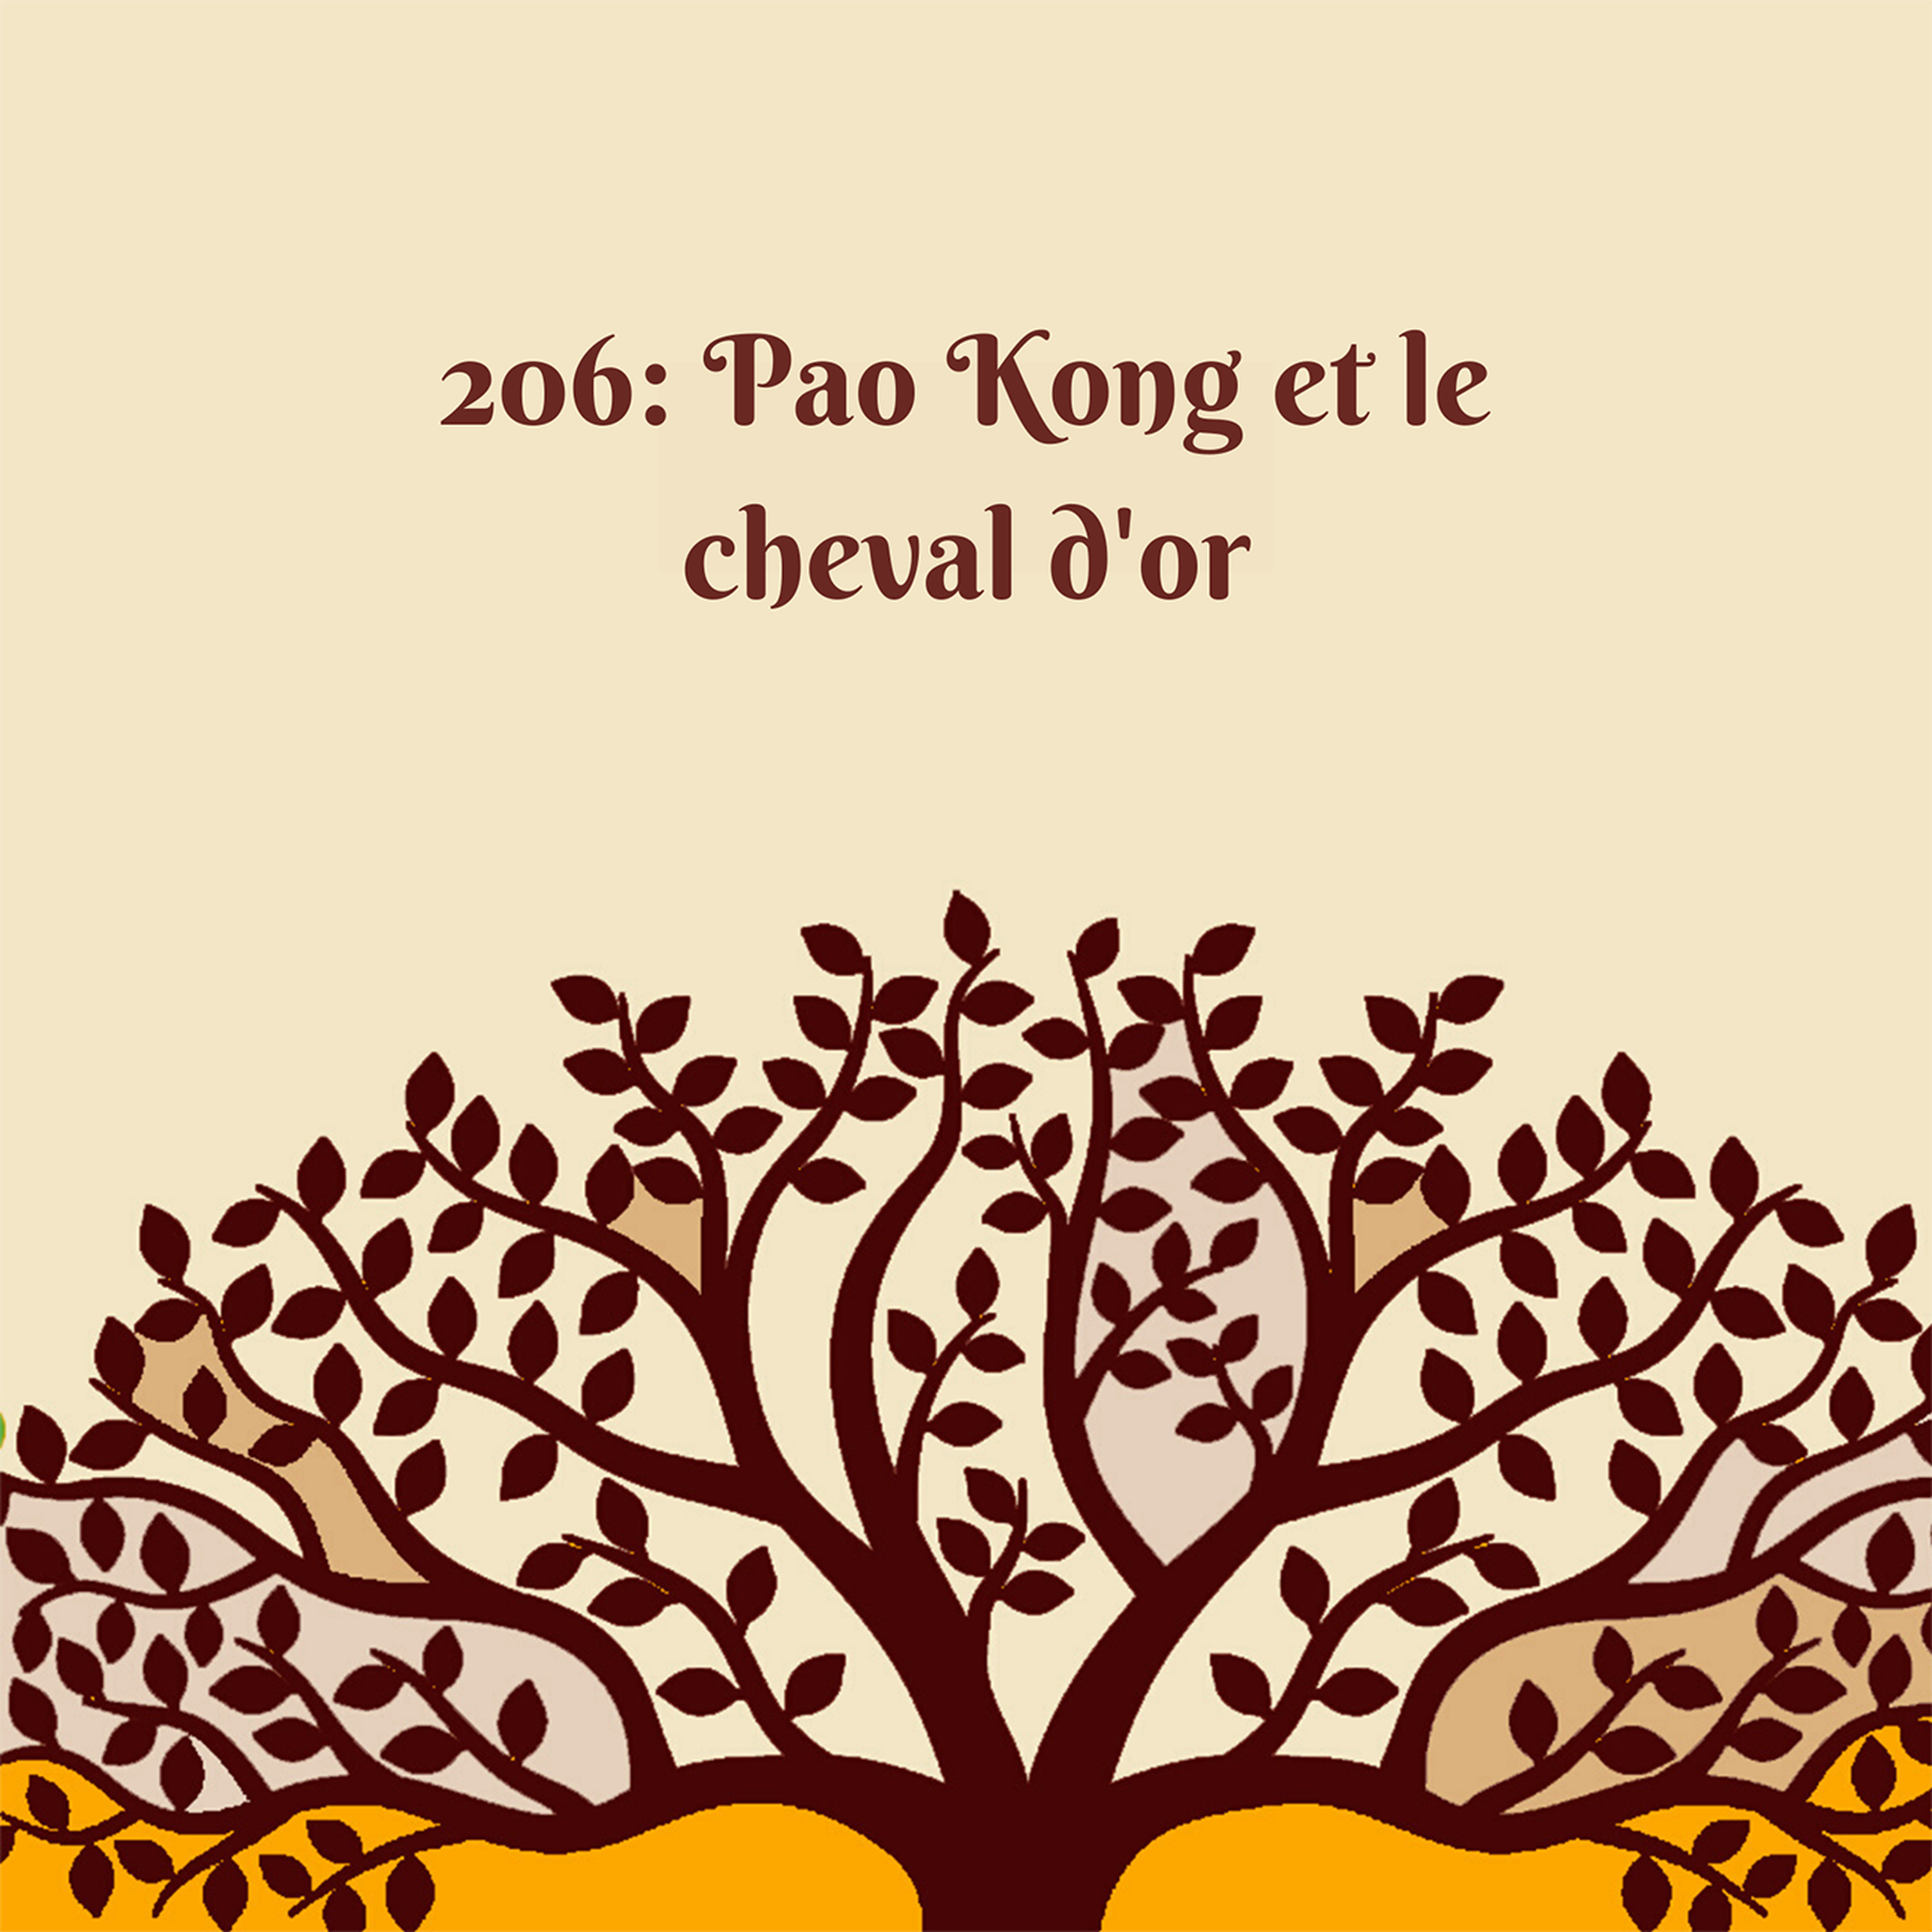 Pao Kong et le cheval d’or